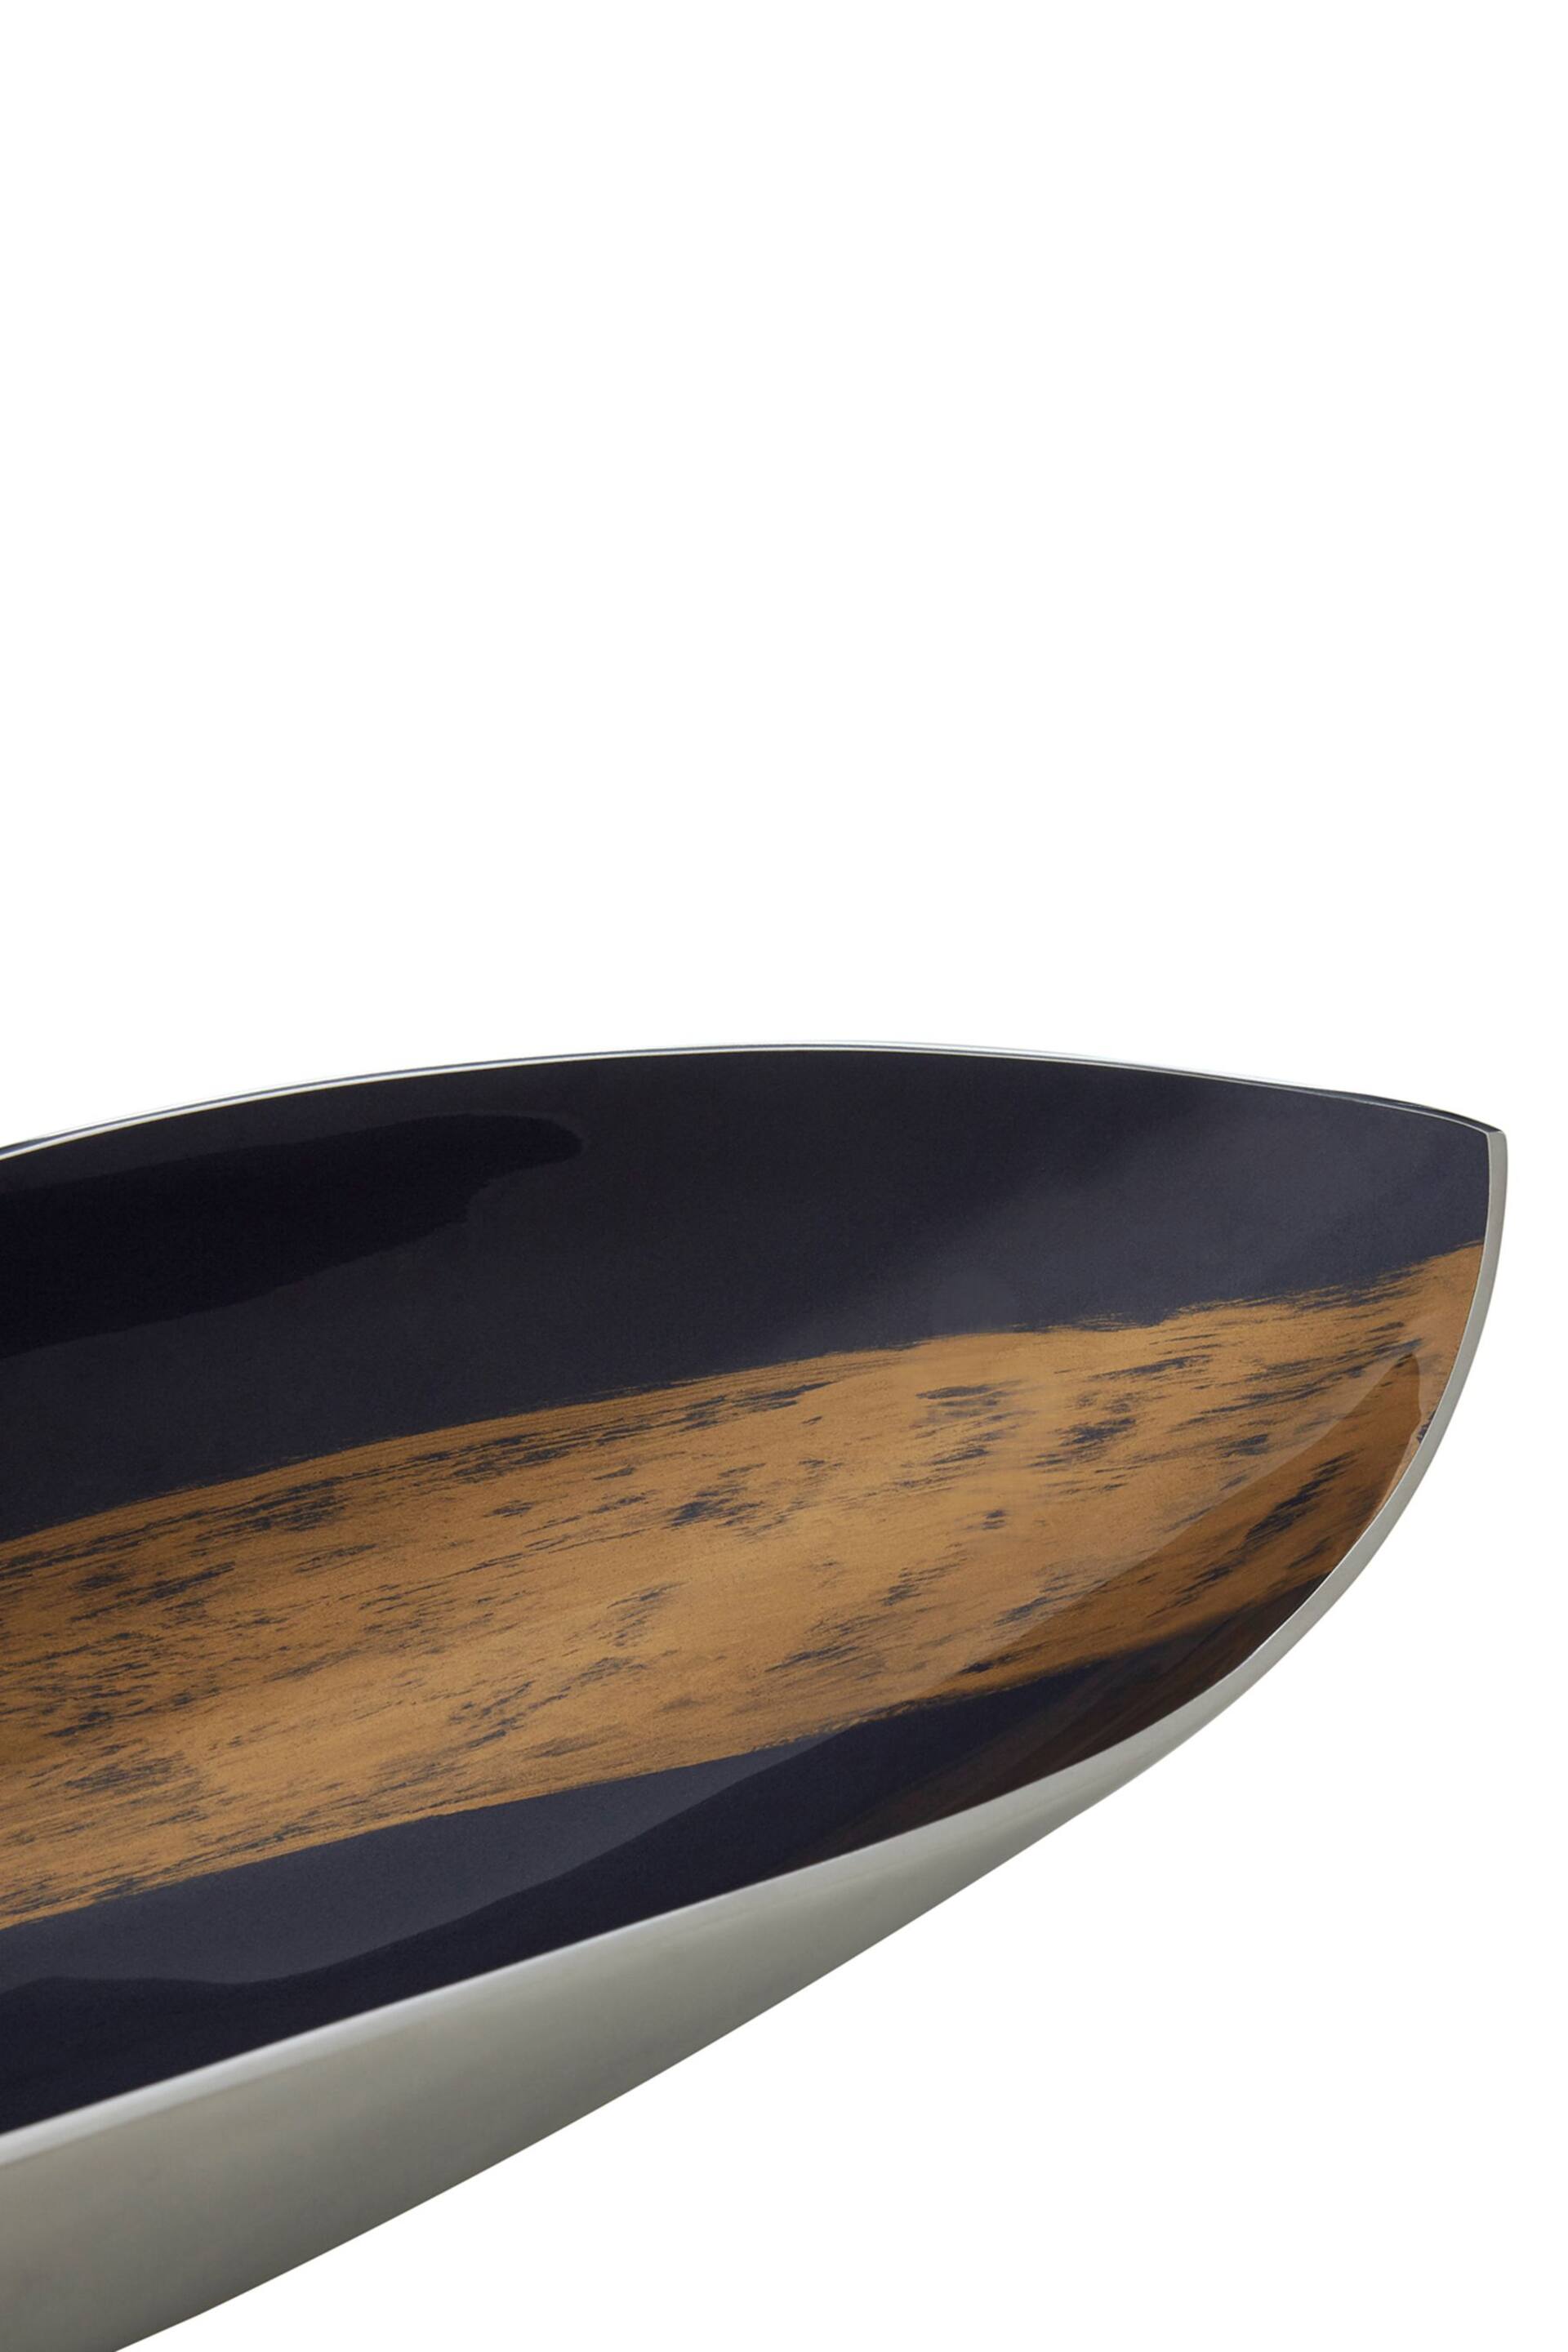 Fifty Five South Black Large Curved Dish - Image 4 of 4